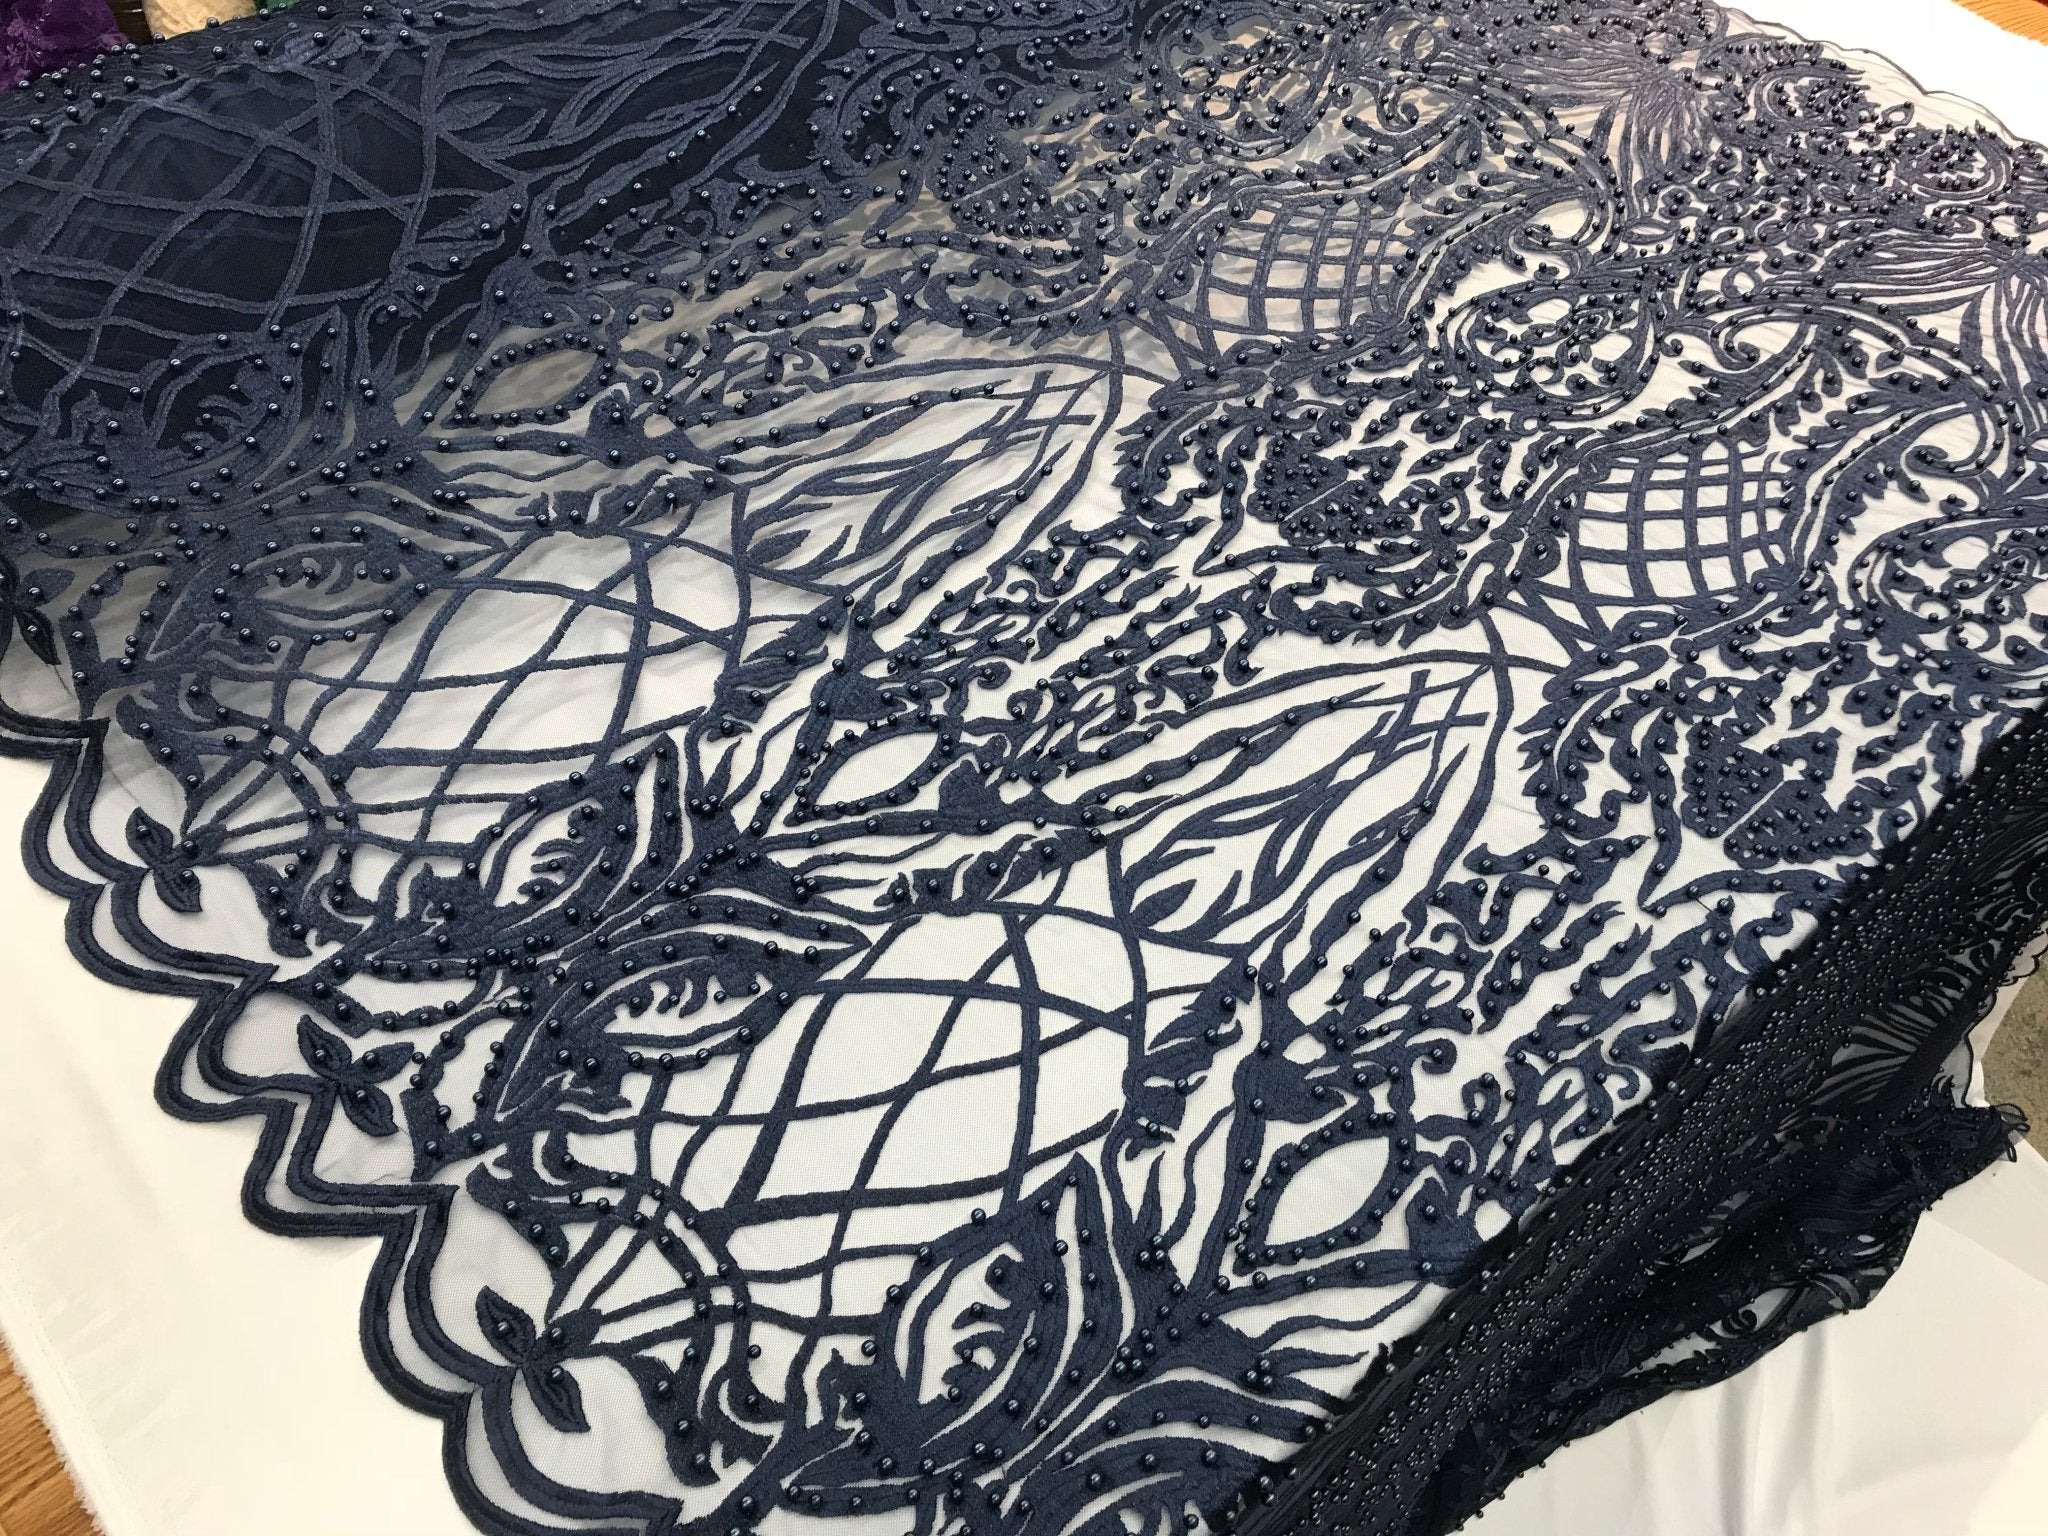 Navy Blue Design Beaded Fabric,Lace Fabric By The YardICE FABRICSICE FABRICSNavy Blue Design Beaded Fabric,Lace Fabric By The Yard ICE FABRICS